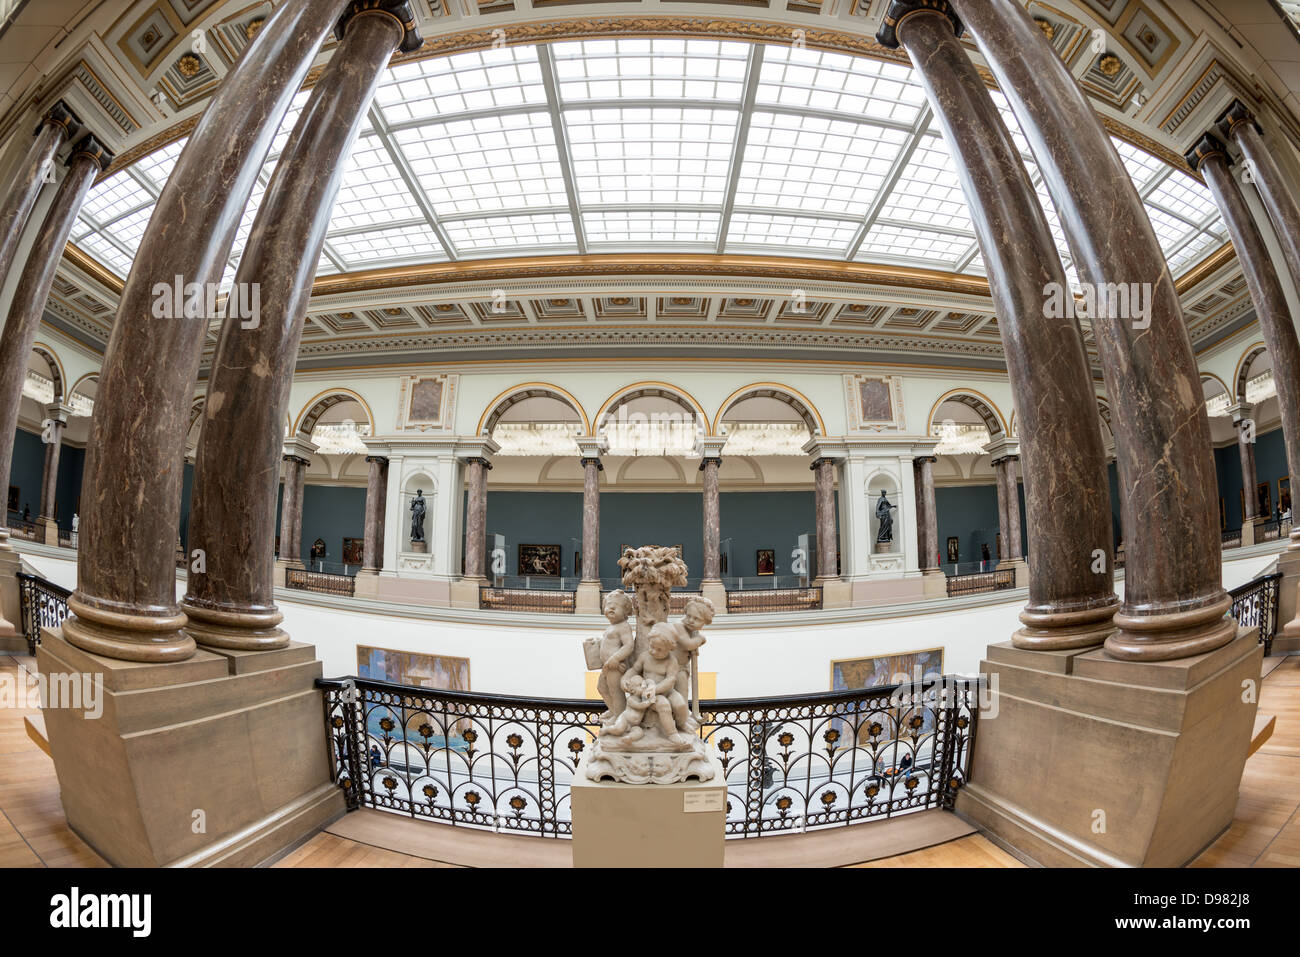 BRUSSELS, Belgium - A side view of the main hall at the Royal Museums of Fine Arts in Belgium (in French, Musées royaux des Beaux-Arts de Belgique), one of the most famous museums in Belgium. The complex consists of several museums, including Ancient Art Museum (XV - XVII century), the Modern Art Museum (XIX  XX century), the Wiertz Museum, the Meunier Museum and the Museé Magritte Museum. Stock Photo